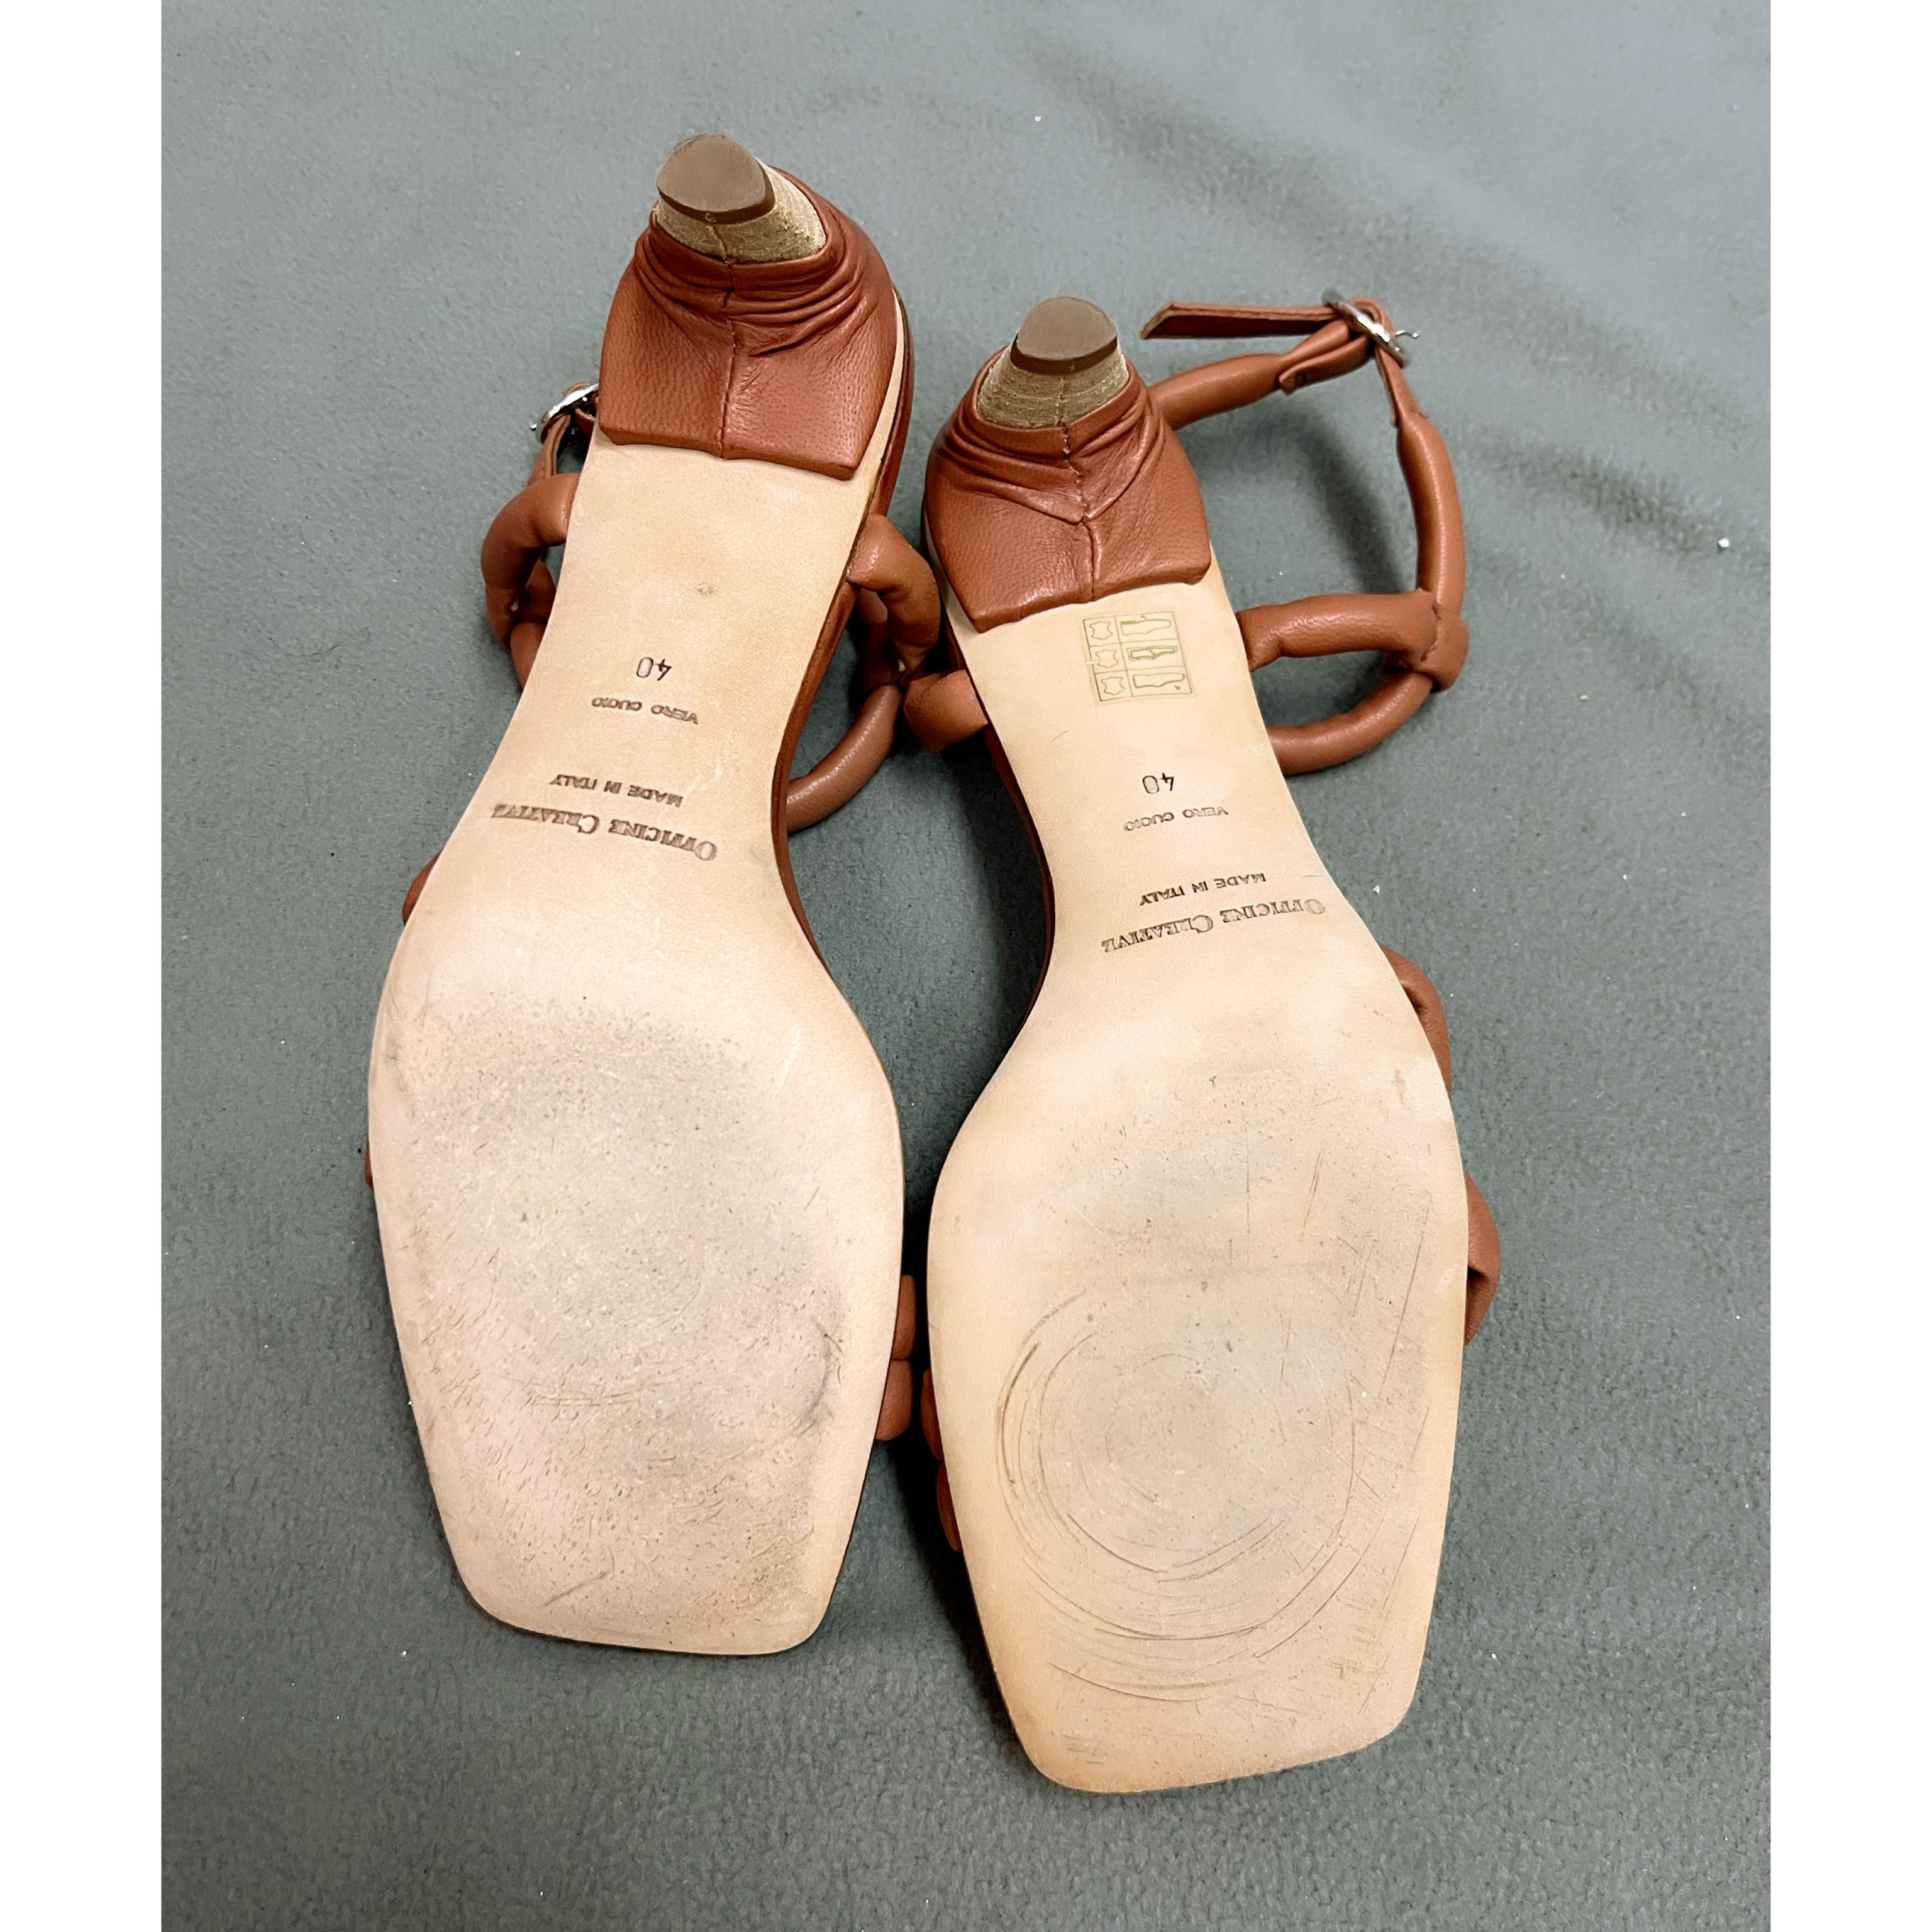 Officine Creative brown leather sandals, size 10, LIKE NEW!